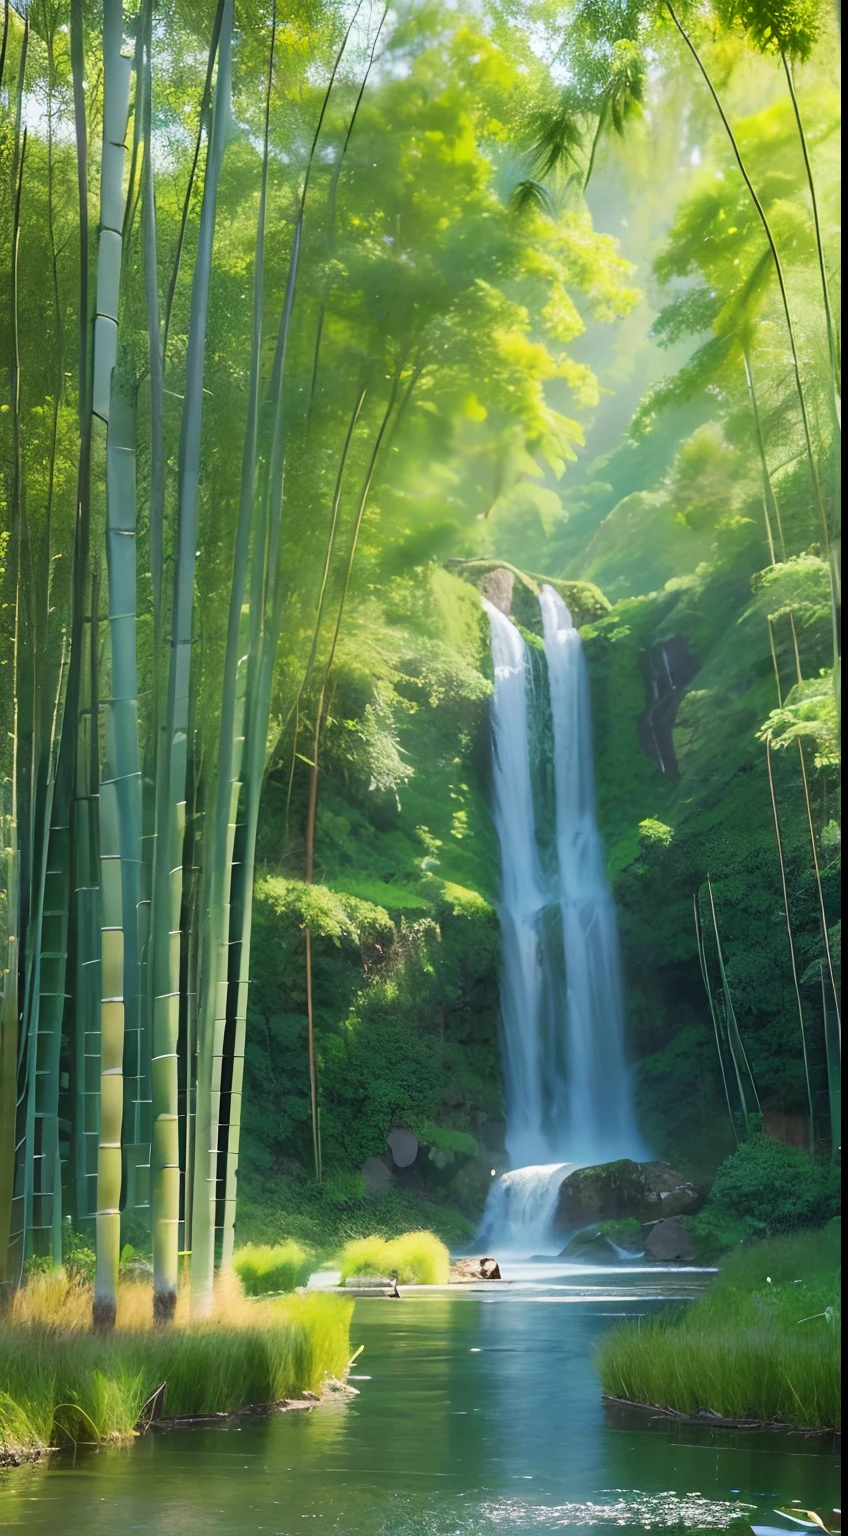 A bamboo forest with a vast field, where colorful birds soar gracefully above, background is sun

Medium: Traditional ink painting

Additional Details: Serene river flowing through the field, gentle breeze rustling the leaves, sunlight filtering through the bamboo canopy, small insects buzzing around the flowers.

Image Quality: (best quality, 4k, highres), ultra-detailed, realistic

Art Style: Traditional Chinese landscape painting

Color Palette: Shades of green for the bamboo, contrasting with the colorful plumage of the birds. Gentle tones of blue for the sky and water.

Lighting: Soft, natural sunlight illuminating the scene, casting subtle shadows amidst the bamboo stalks.